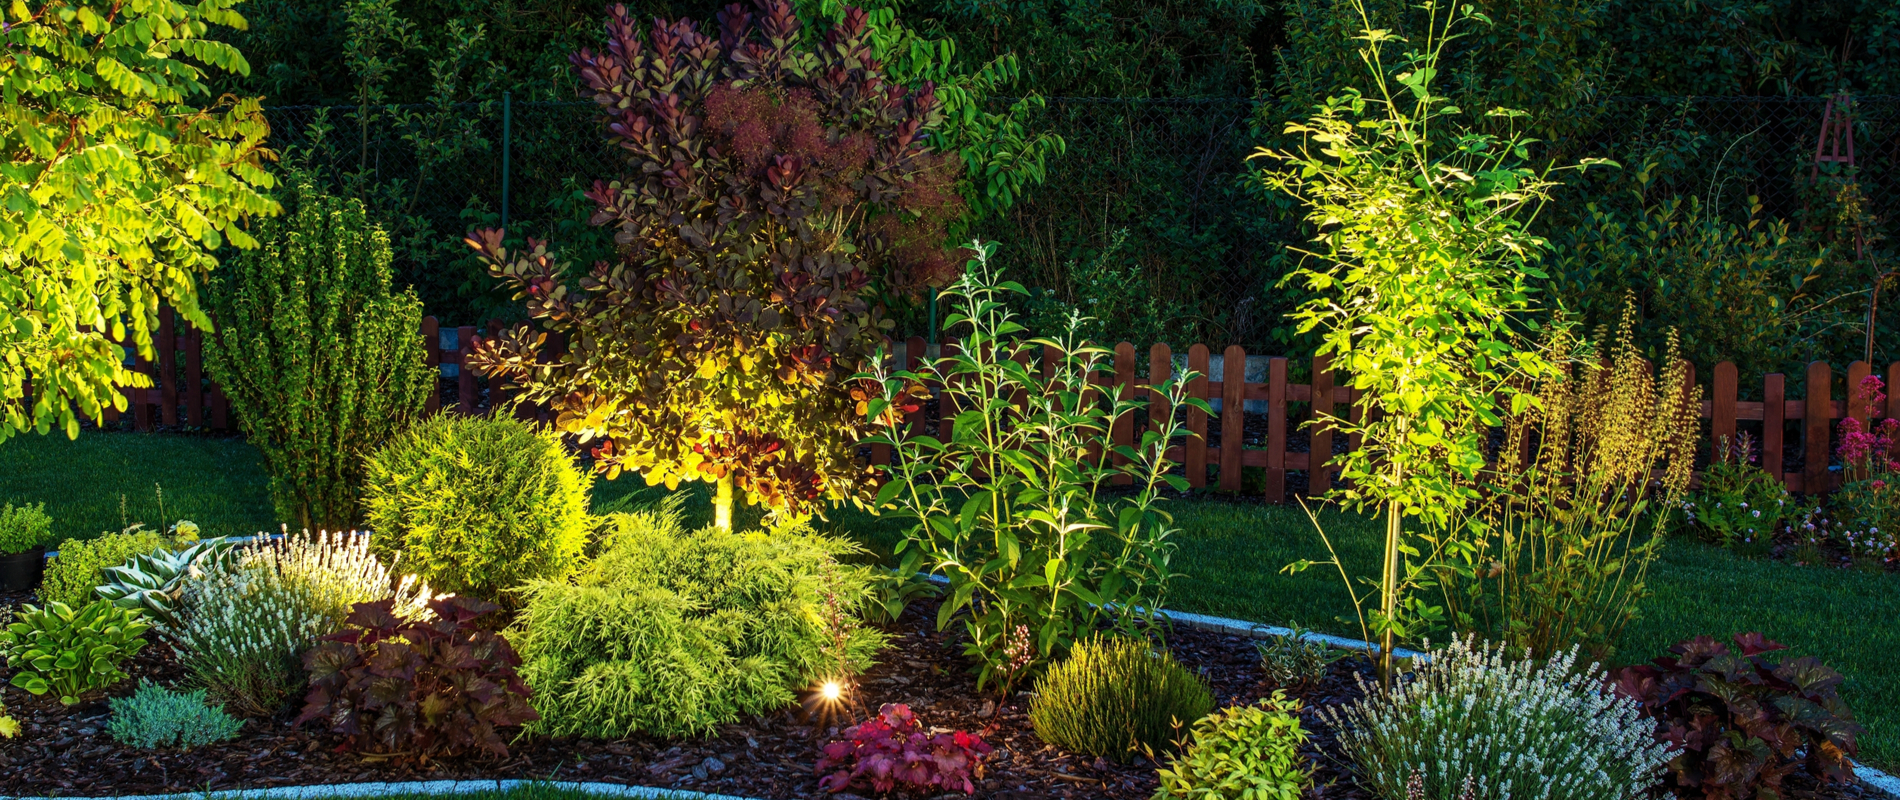 Landscape Lighting Services In St Charles Mo St Charles Sate Landscape Lighting